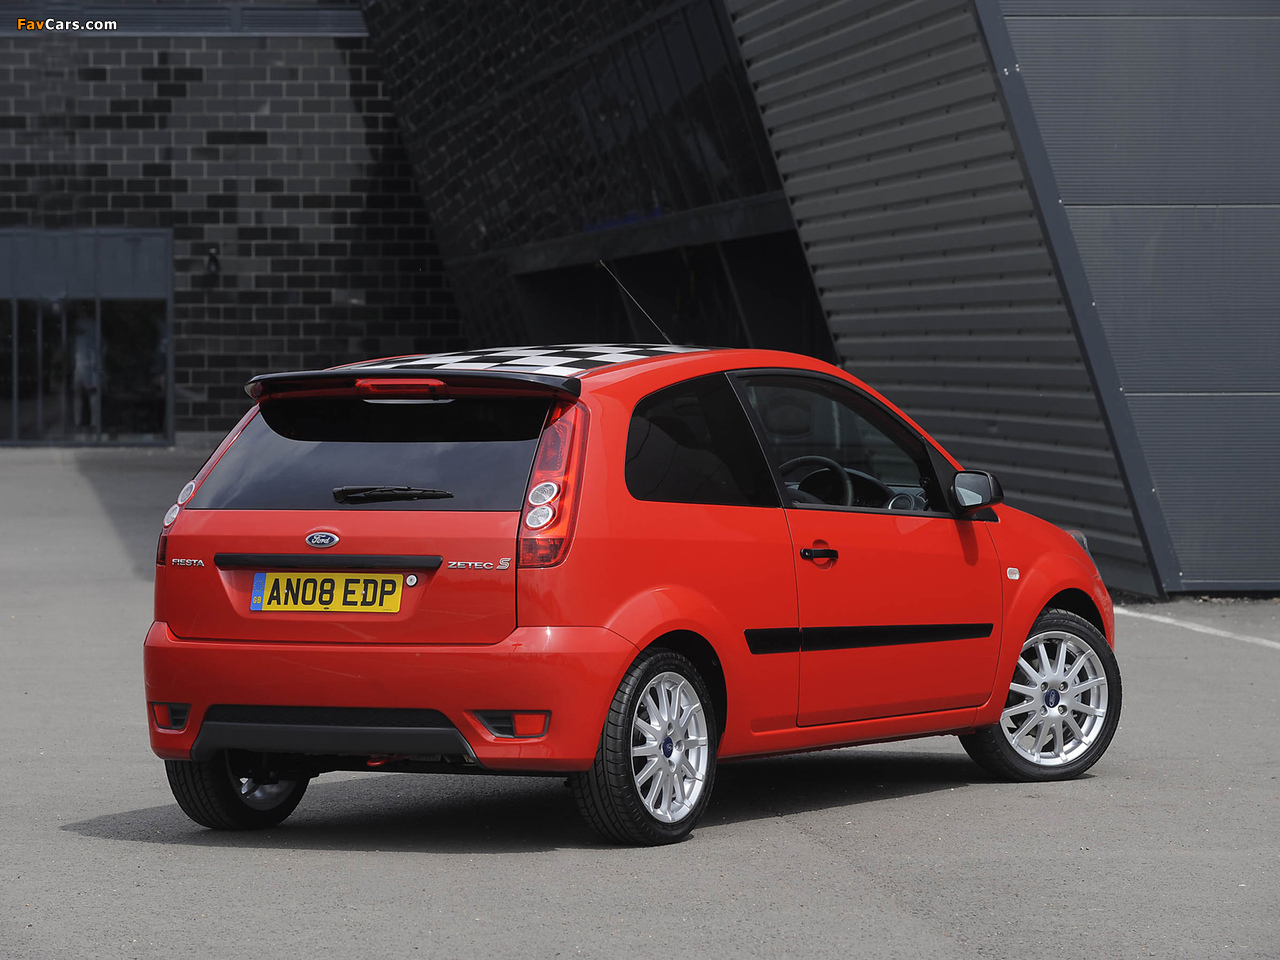 Ford Fiesta Zetec S Red 2008 pictures (1280 x 960)